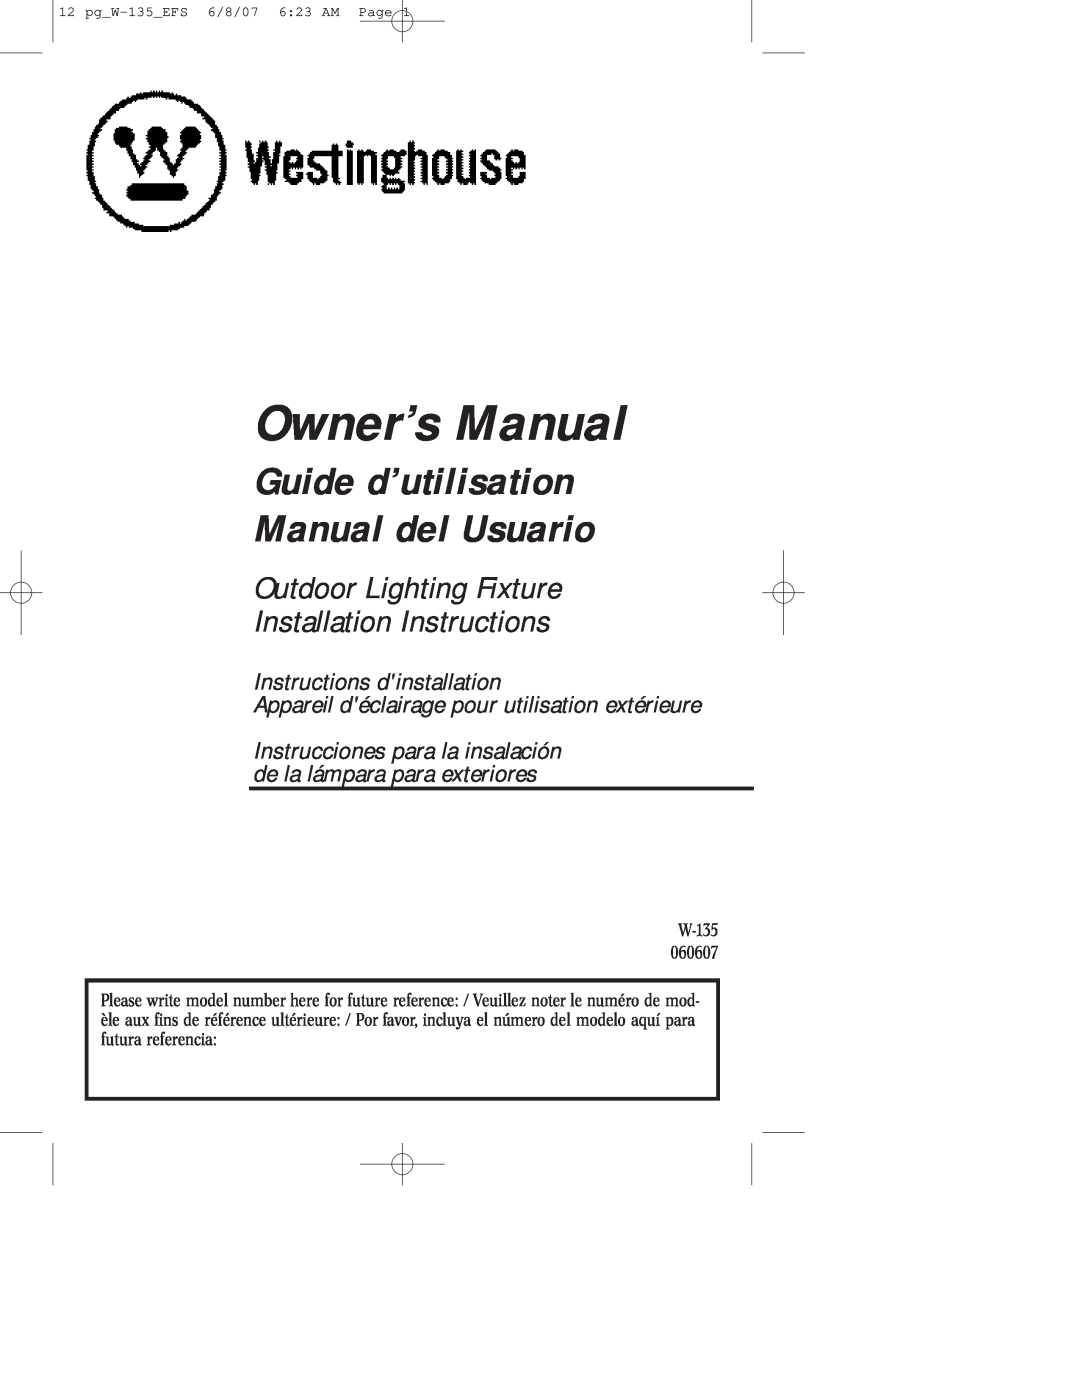 Westinghouse W-135 owner manual Owner’s Manual, Guide d’utilisation Manual del Usuario, Instructions dinstallation 